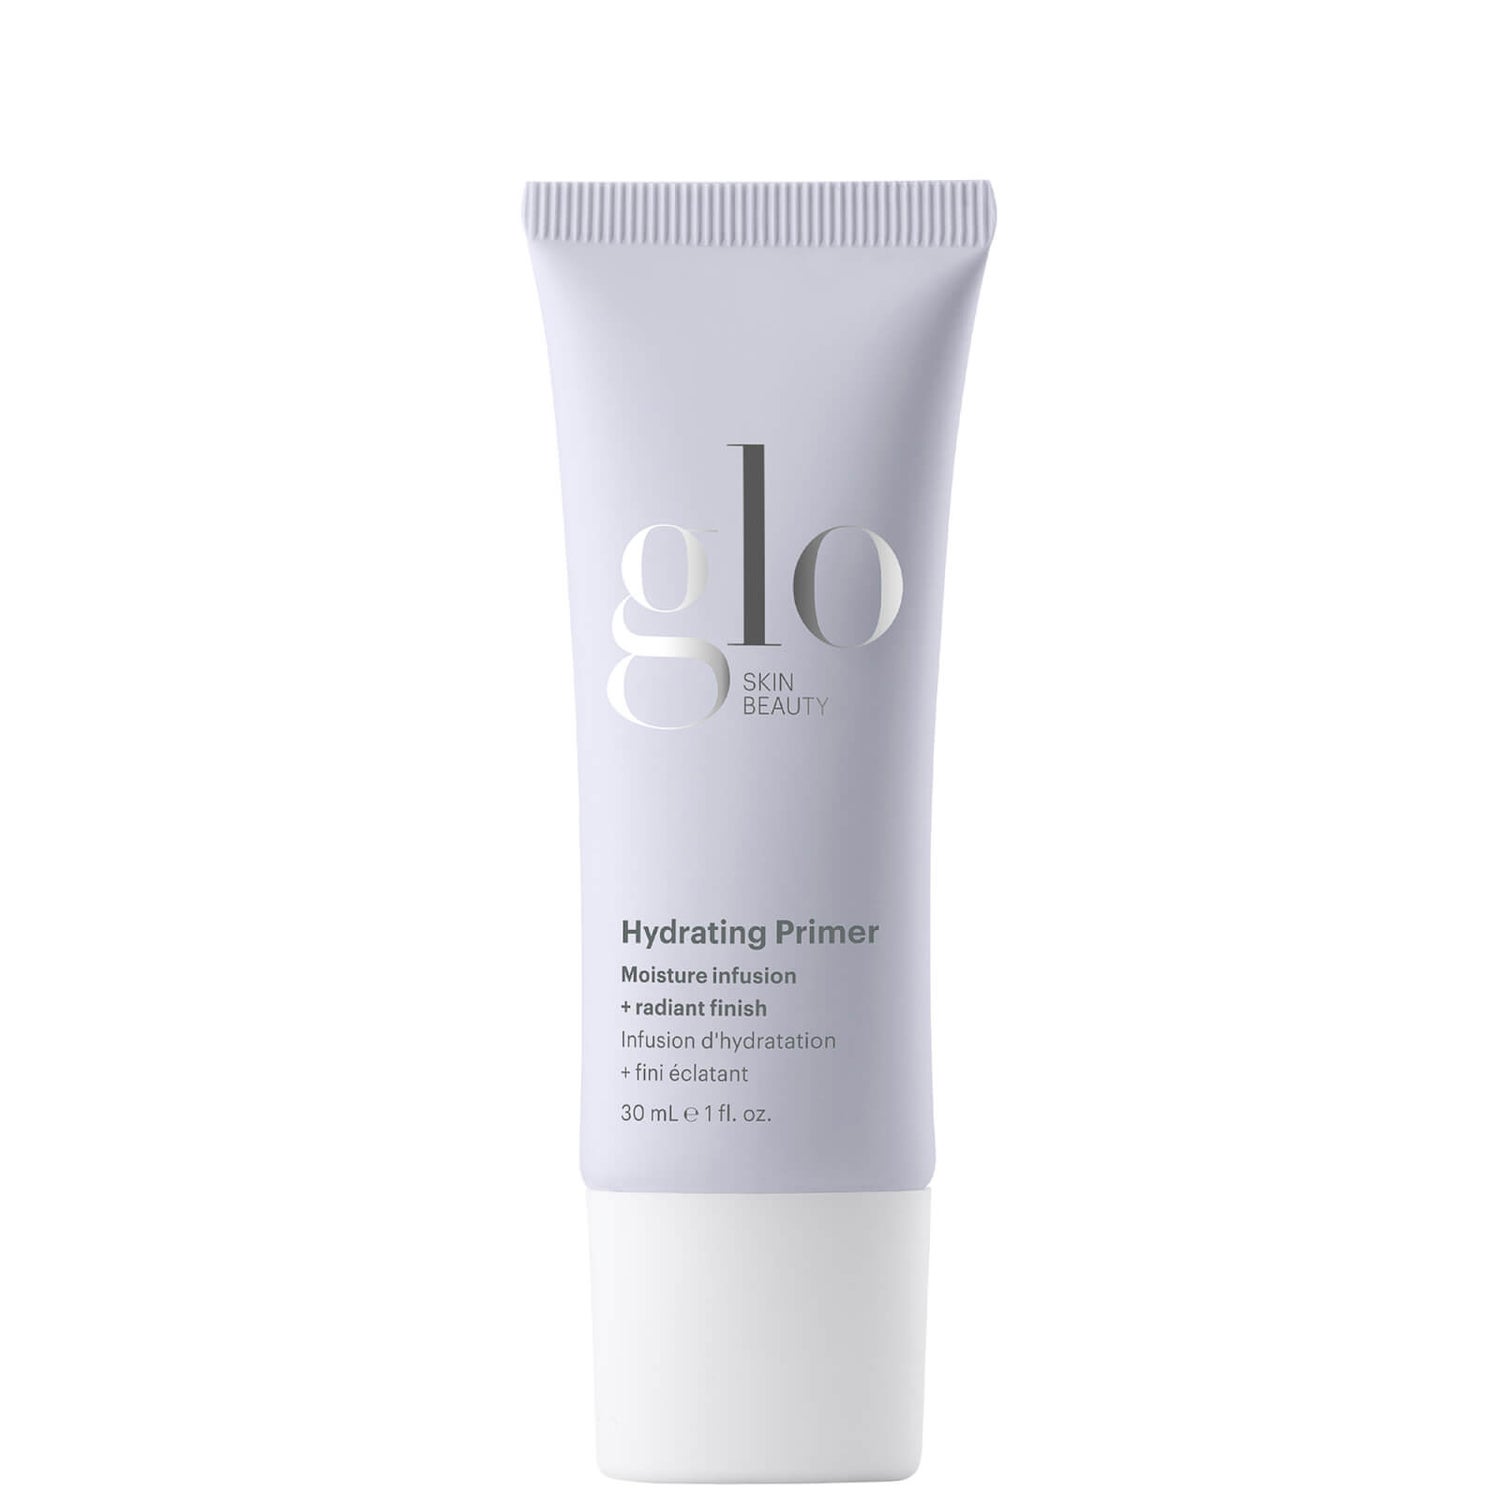 Glo Skin Beauty Hydrating Makeup Primer with Hyaluronic Acid for Dry/Dehydrated Skin 1 fl. oz